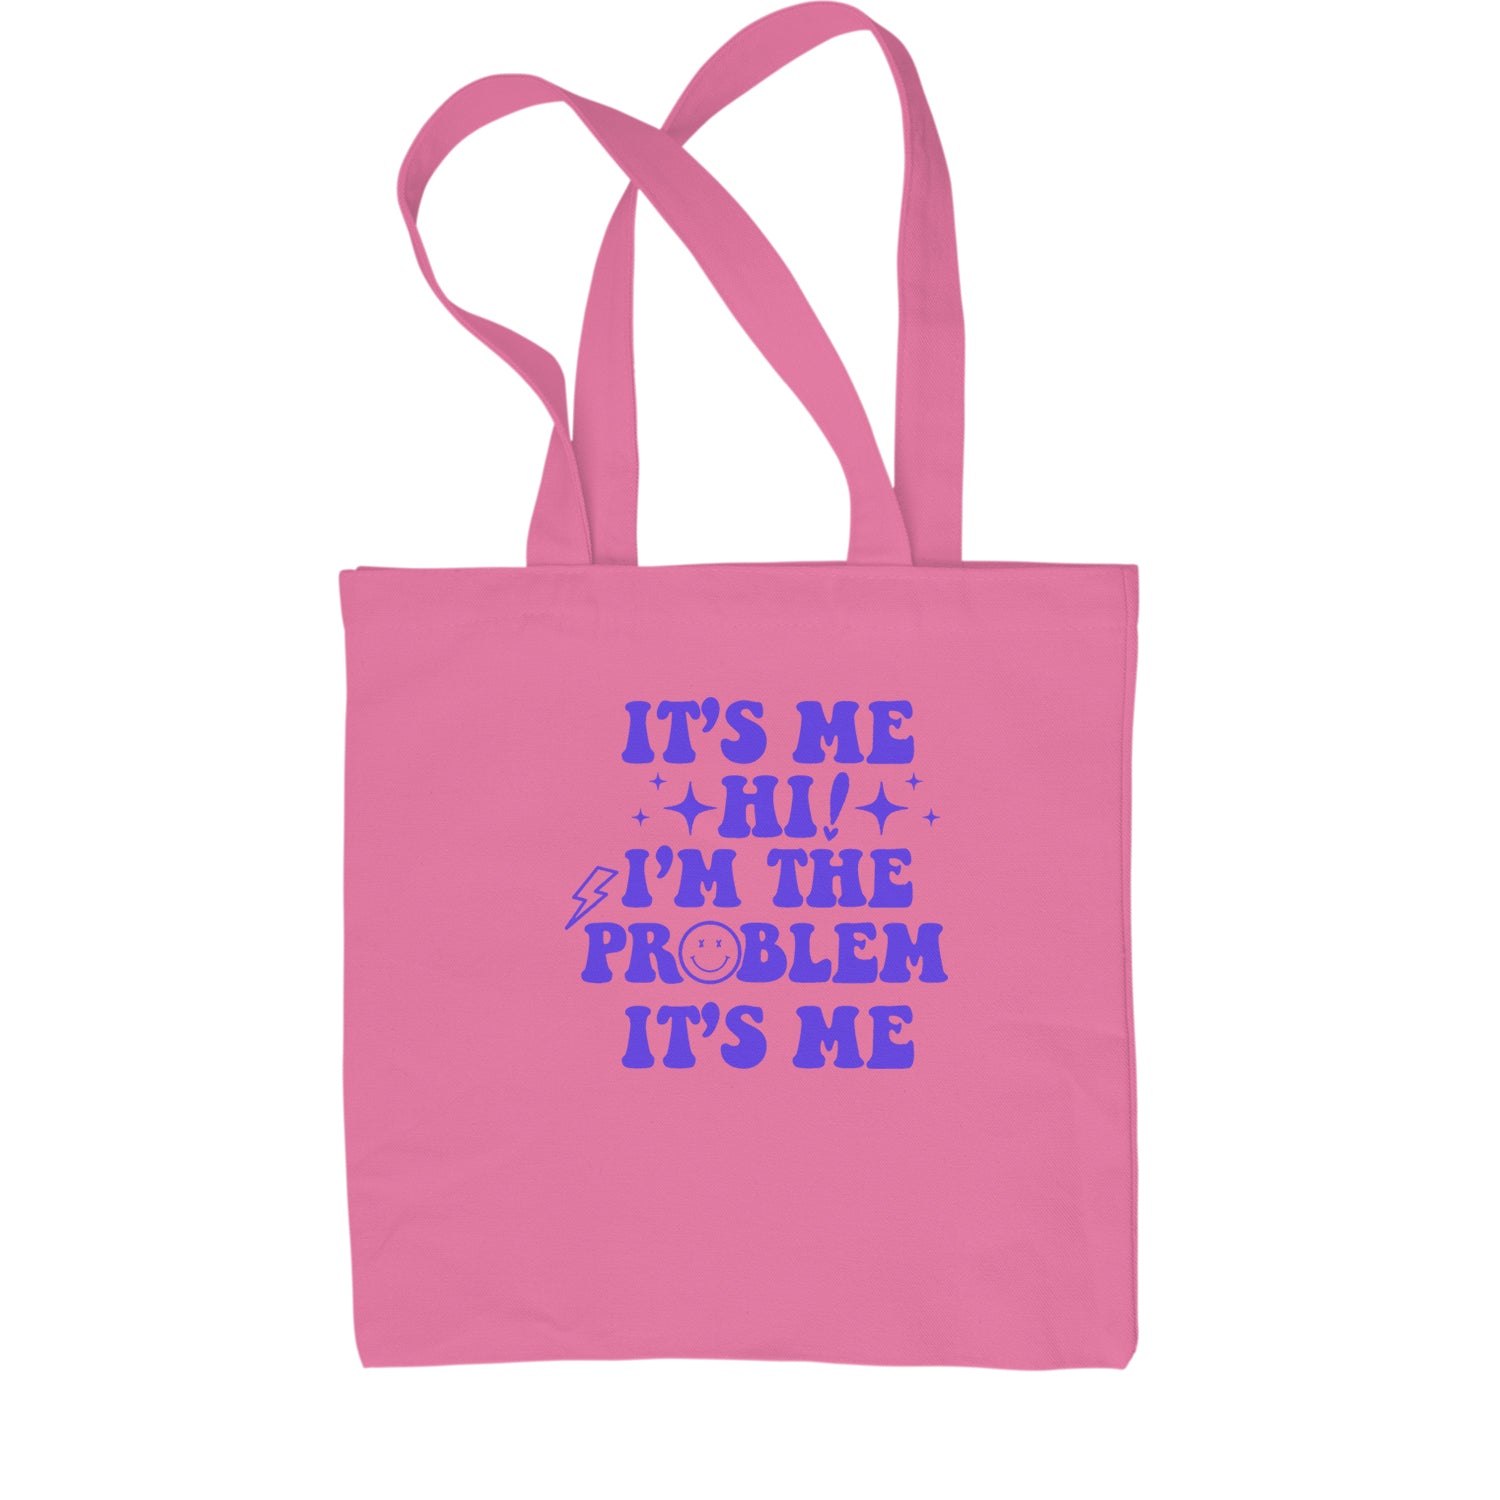 It's Me Hi I'm The Problem Shopping Tote Bag concert, eras, merch, swift, swiftie by Expression Tees